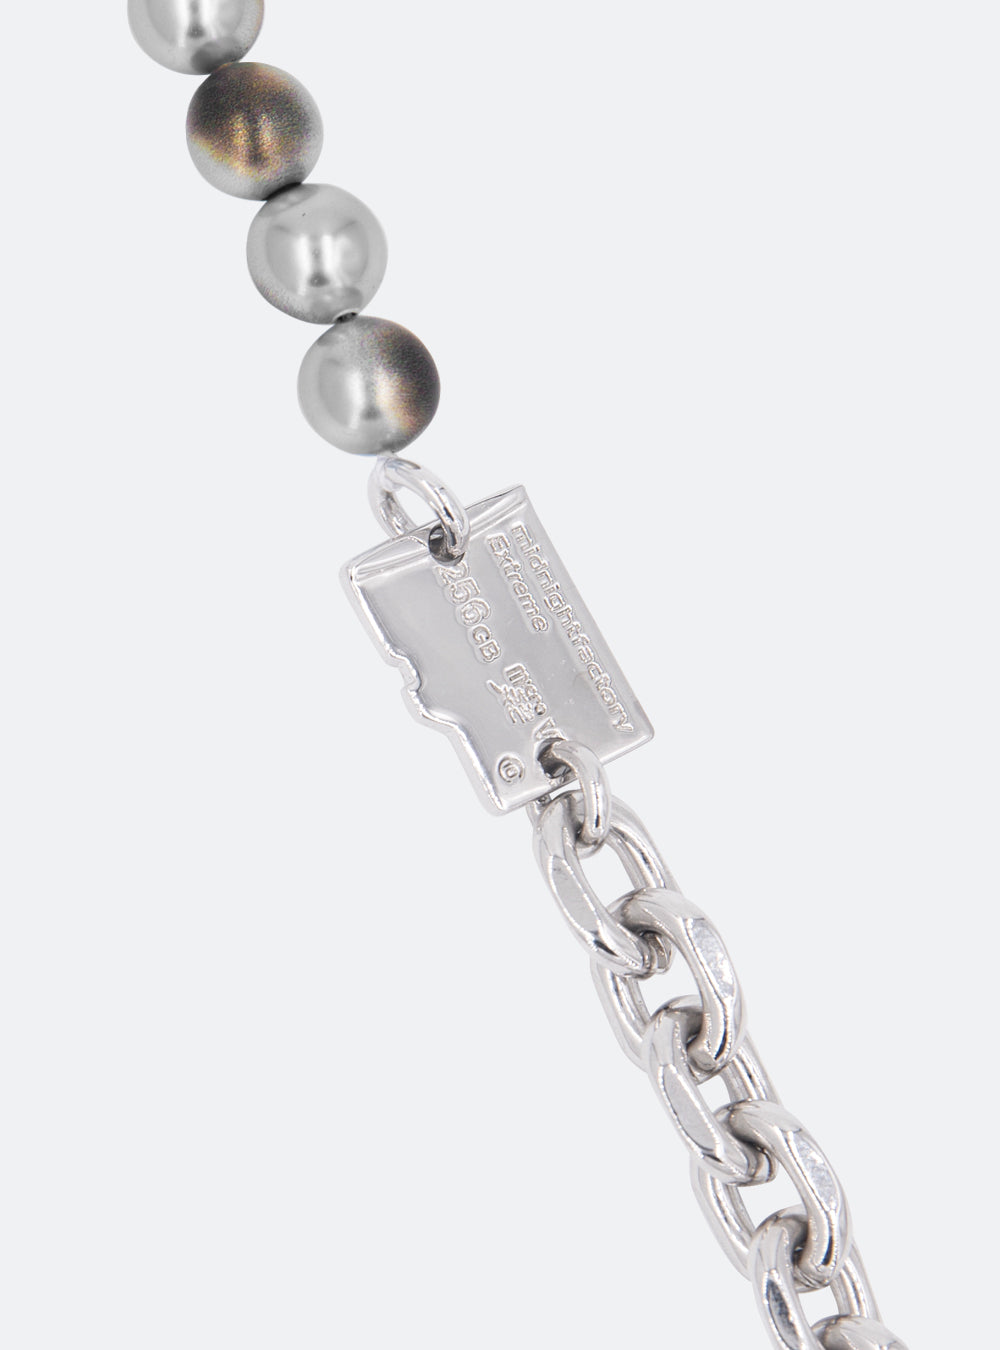 A Micro-SD gray burnt pearls necklace with adjustable length, manufactured by MIDNIGHTFACTORY. [Pre-order]